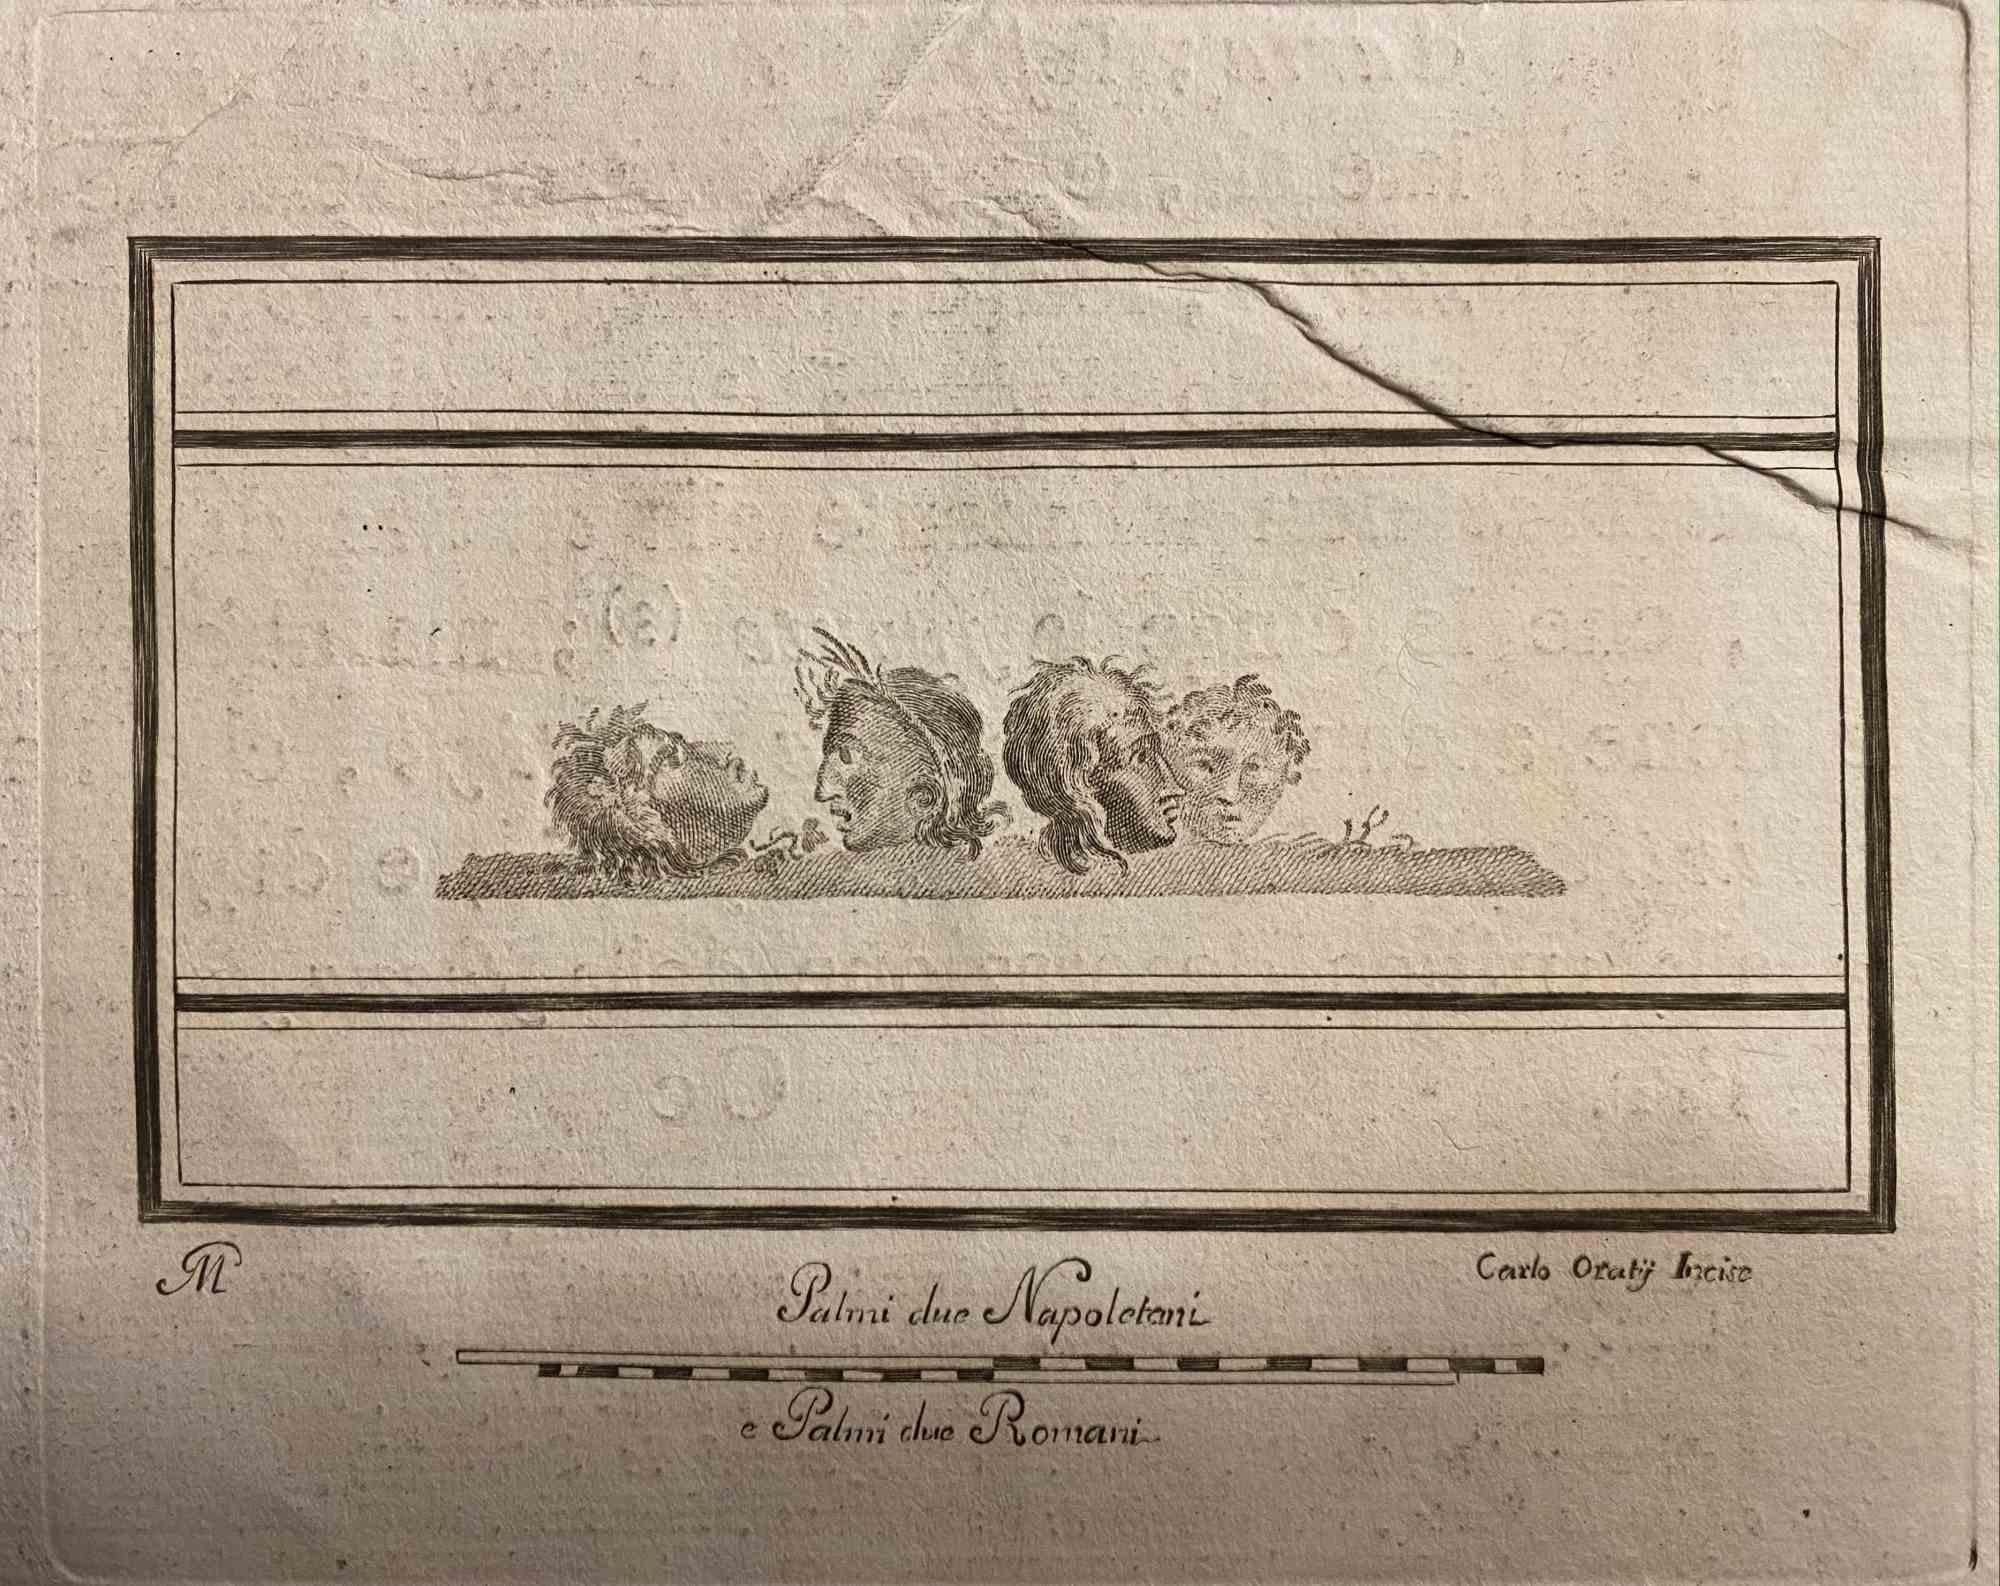 Pompeian Style Tragedy Masks from "Antiquities of Herculaneum" is an etching on paper realized by Carlo Oraty in the 18th Century.

Signed on the plate.

Good conditions with some folding.

The etching belongs to the print suite “Antiquities of